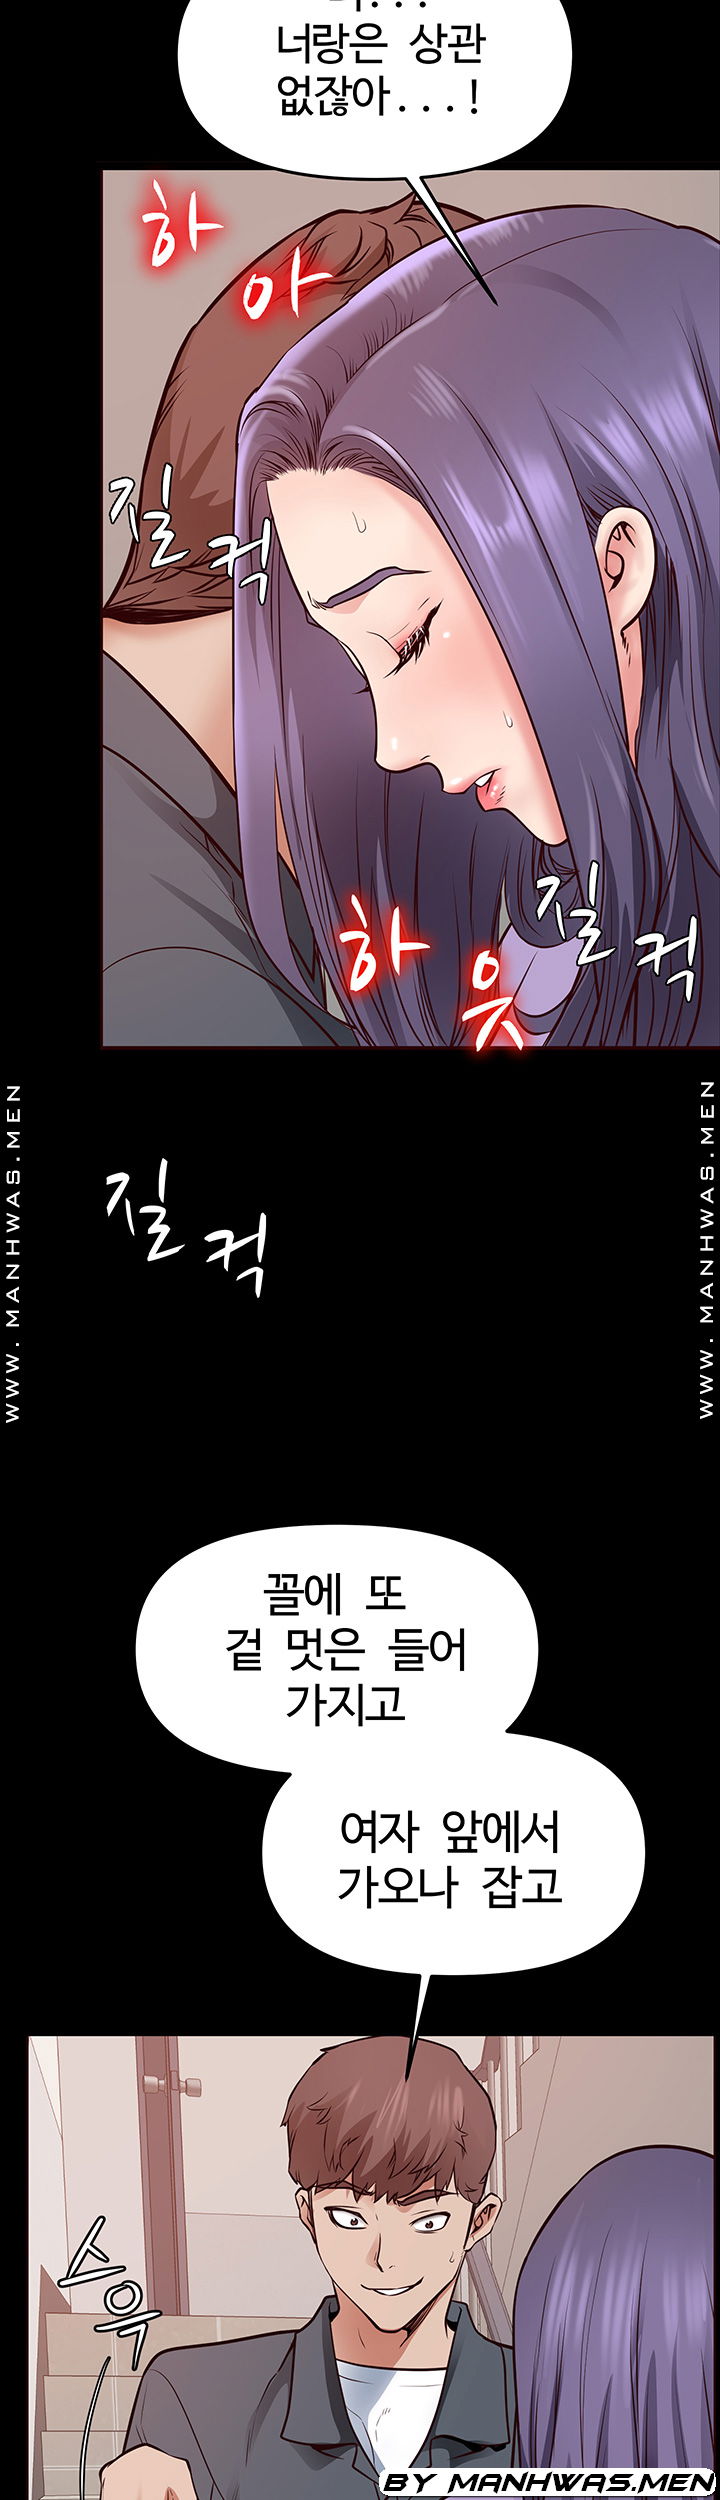 bs-anger-raw-chap-8-21